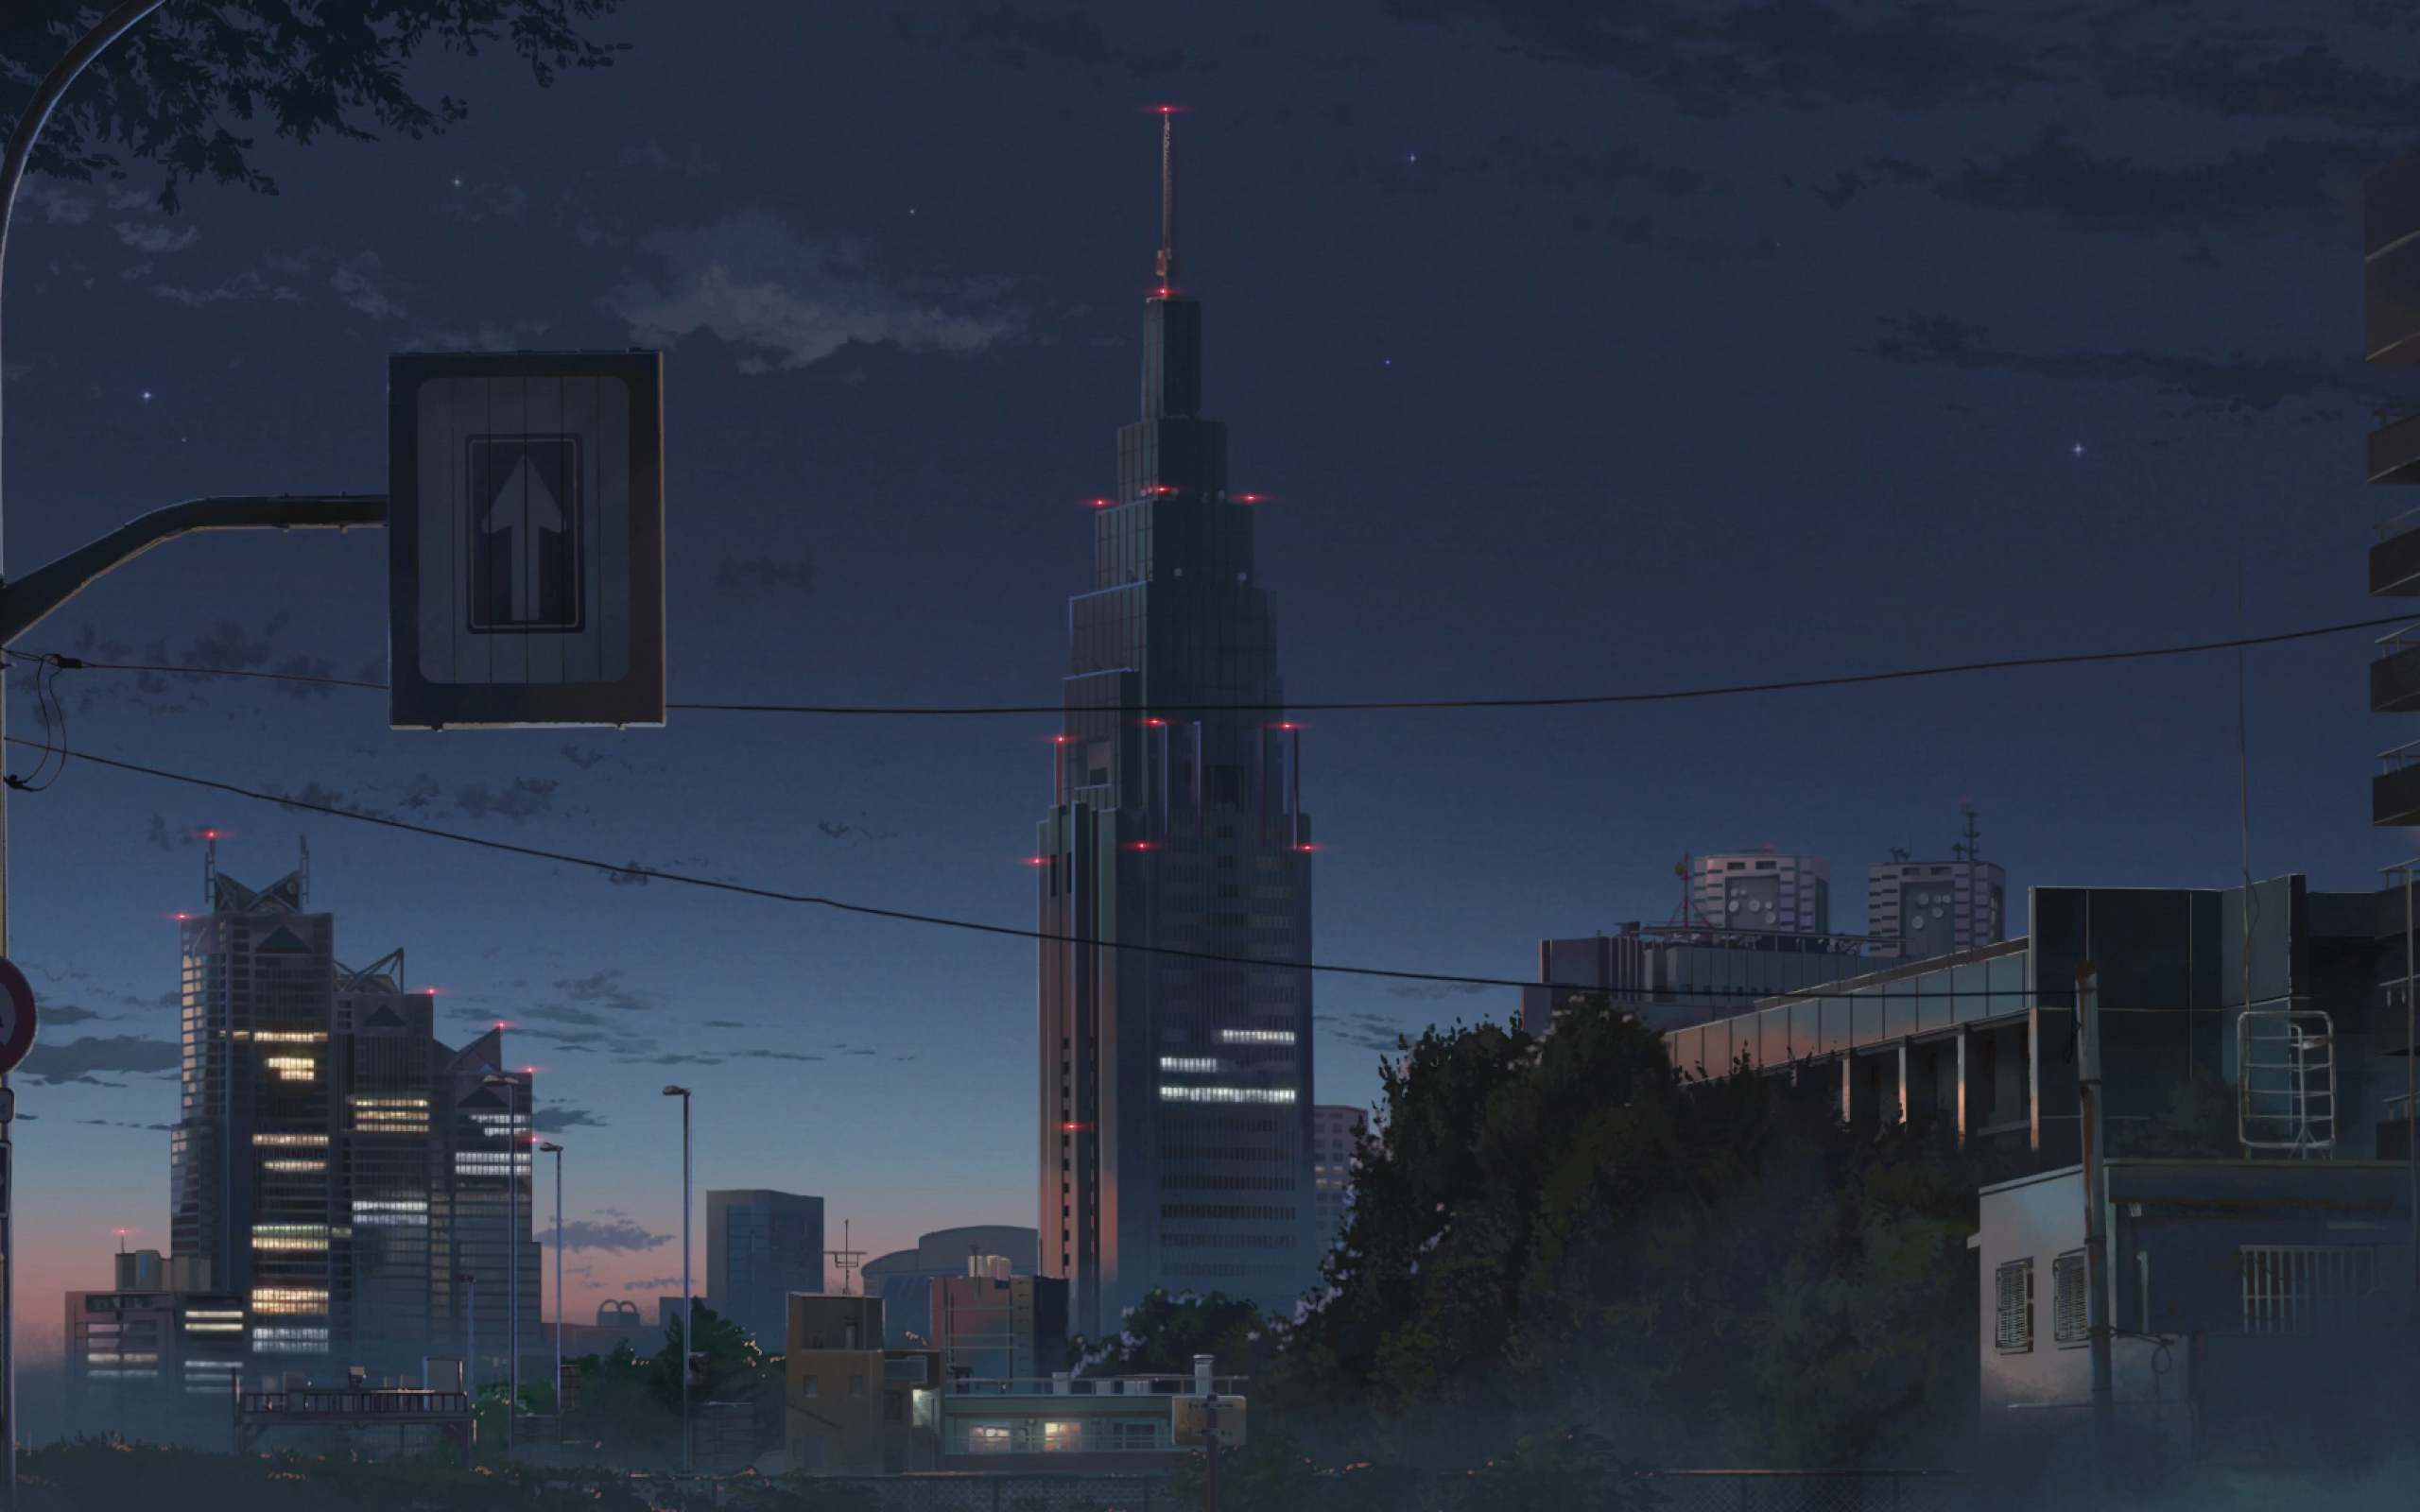 2560x1600 Kimi No Na Wa Anime City 2560x1600 Resolution Wallpaper Hd Anime 4k Wallpapers Images Photos And Background